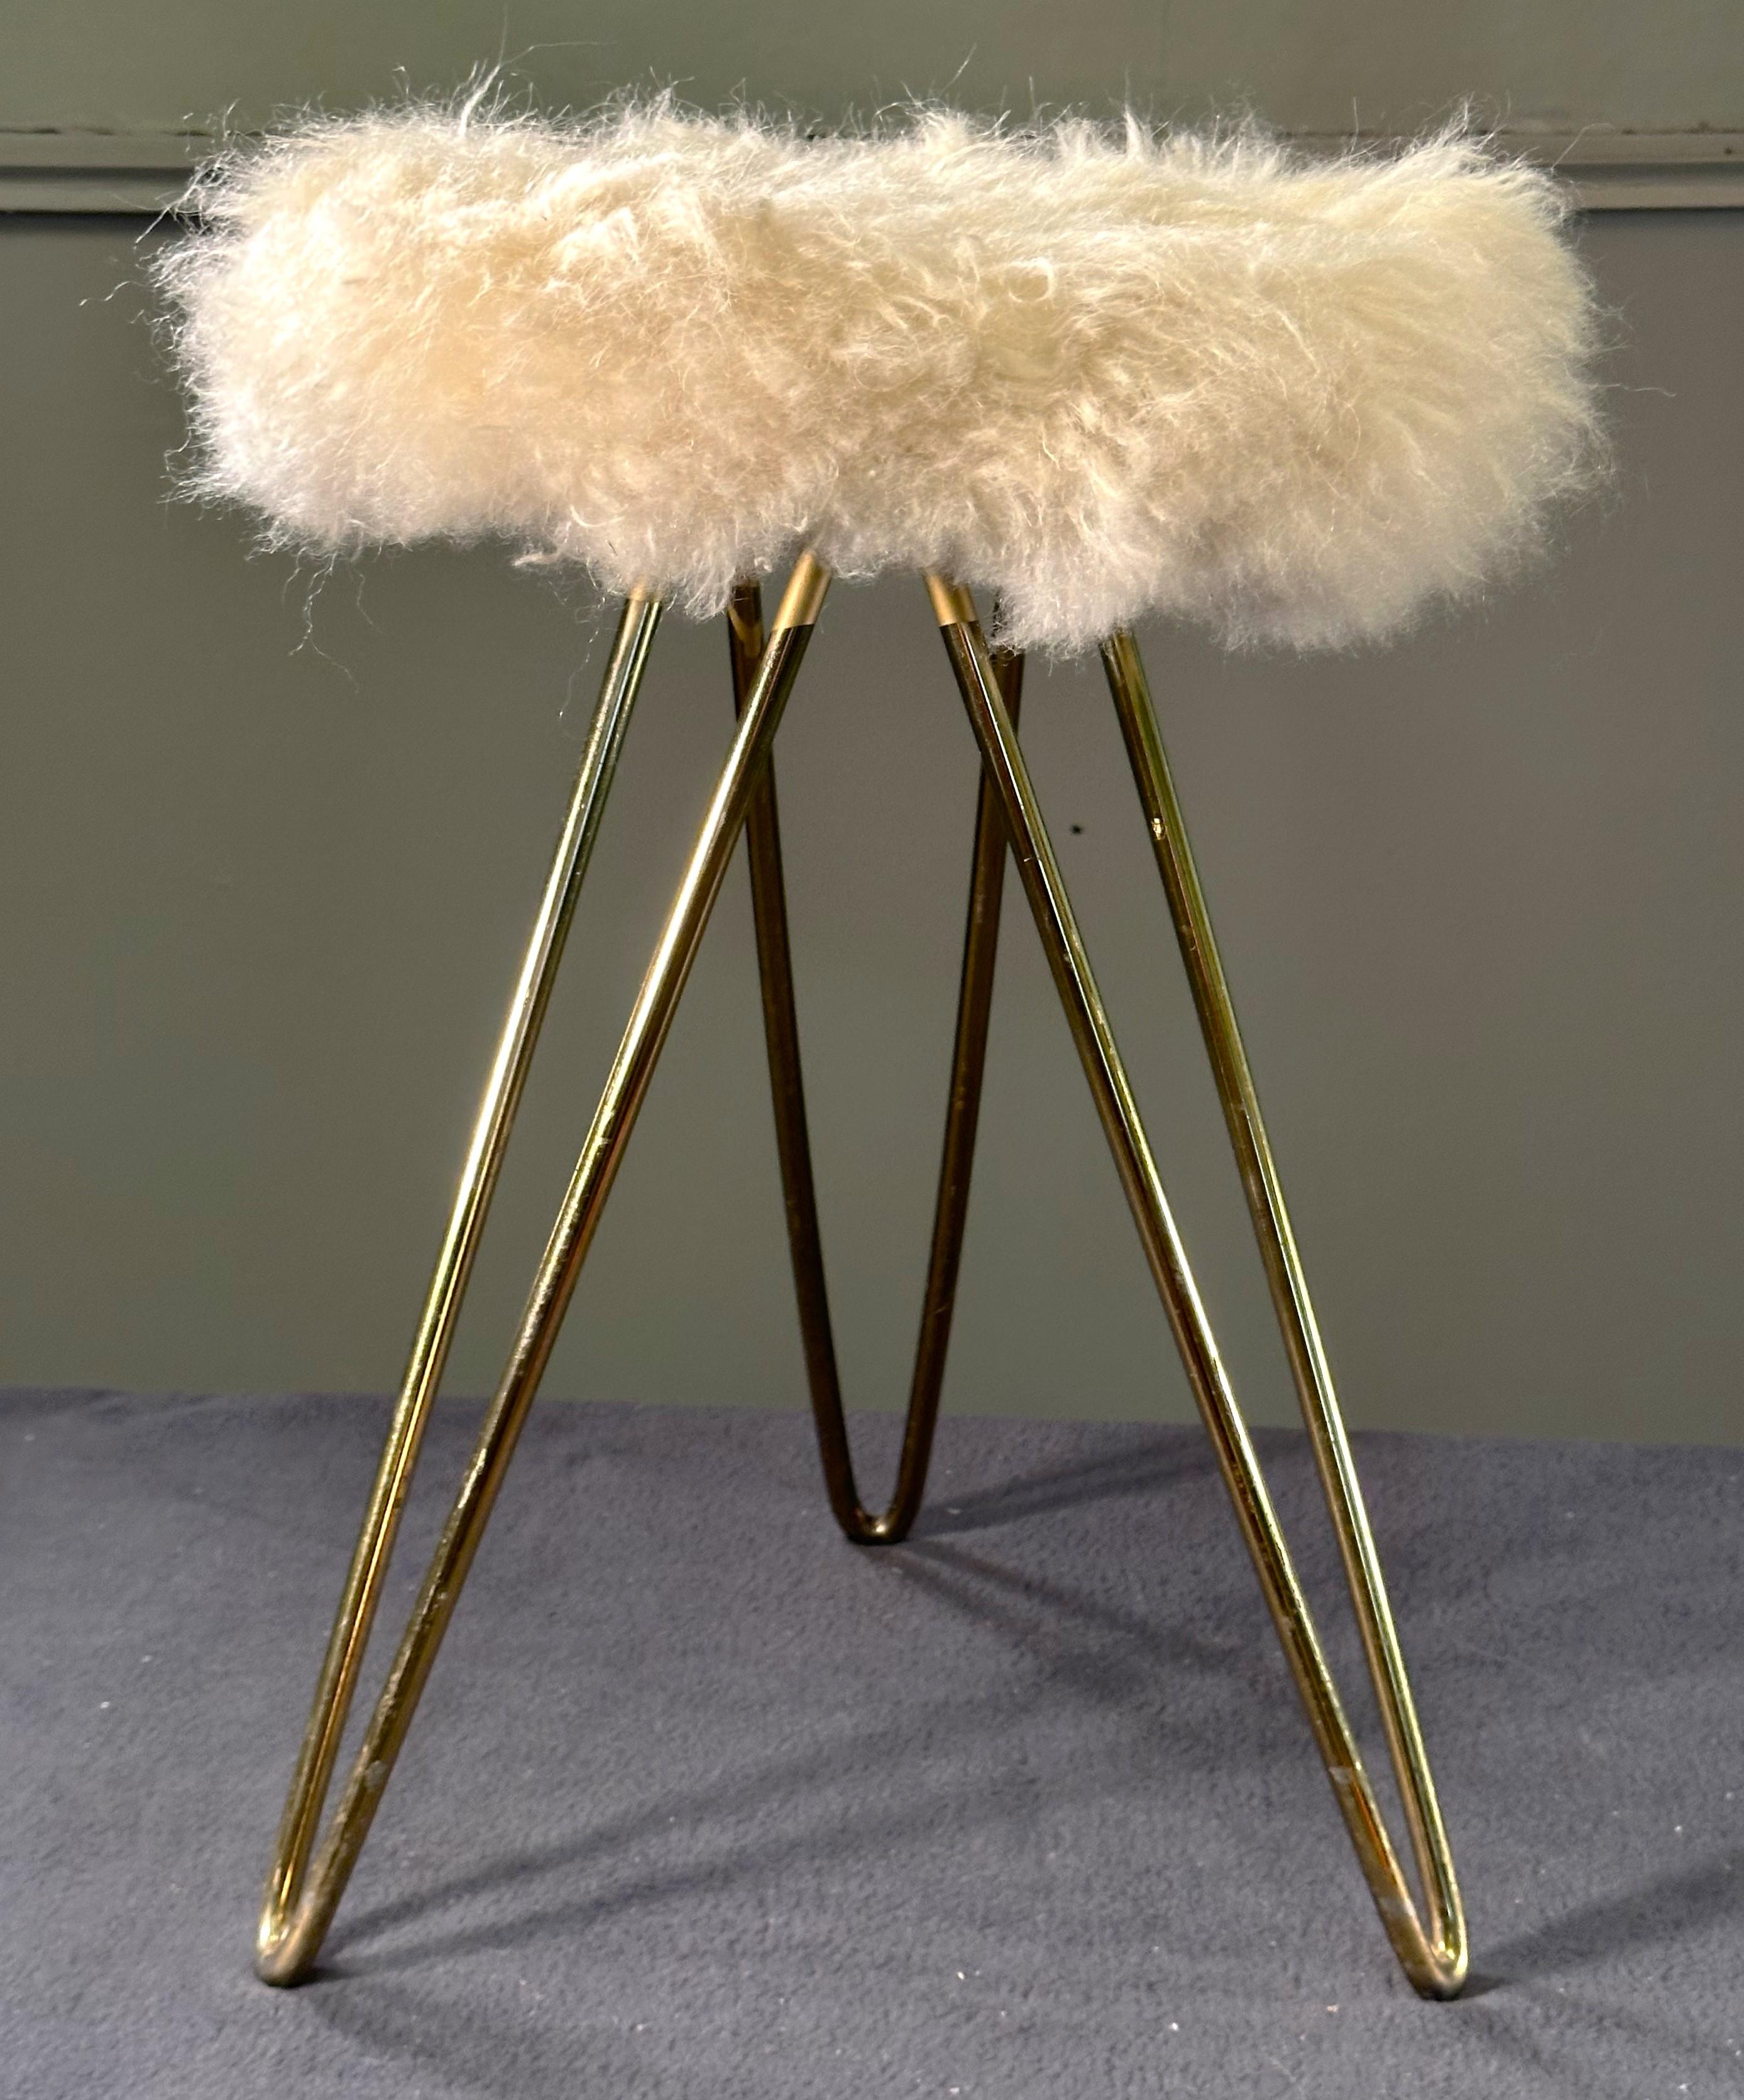 Mid-Century Hairpin Legs Fur Stool, 1950s, France For Sale 4